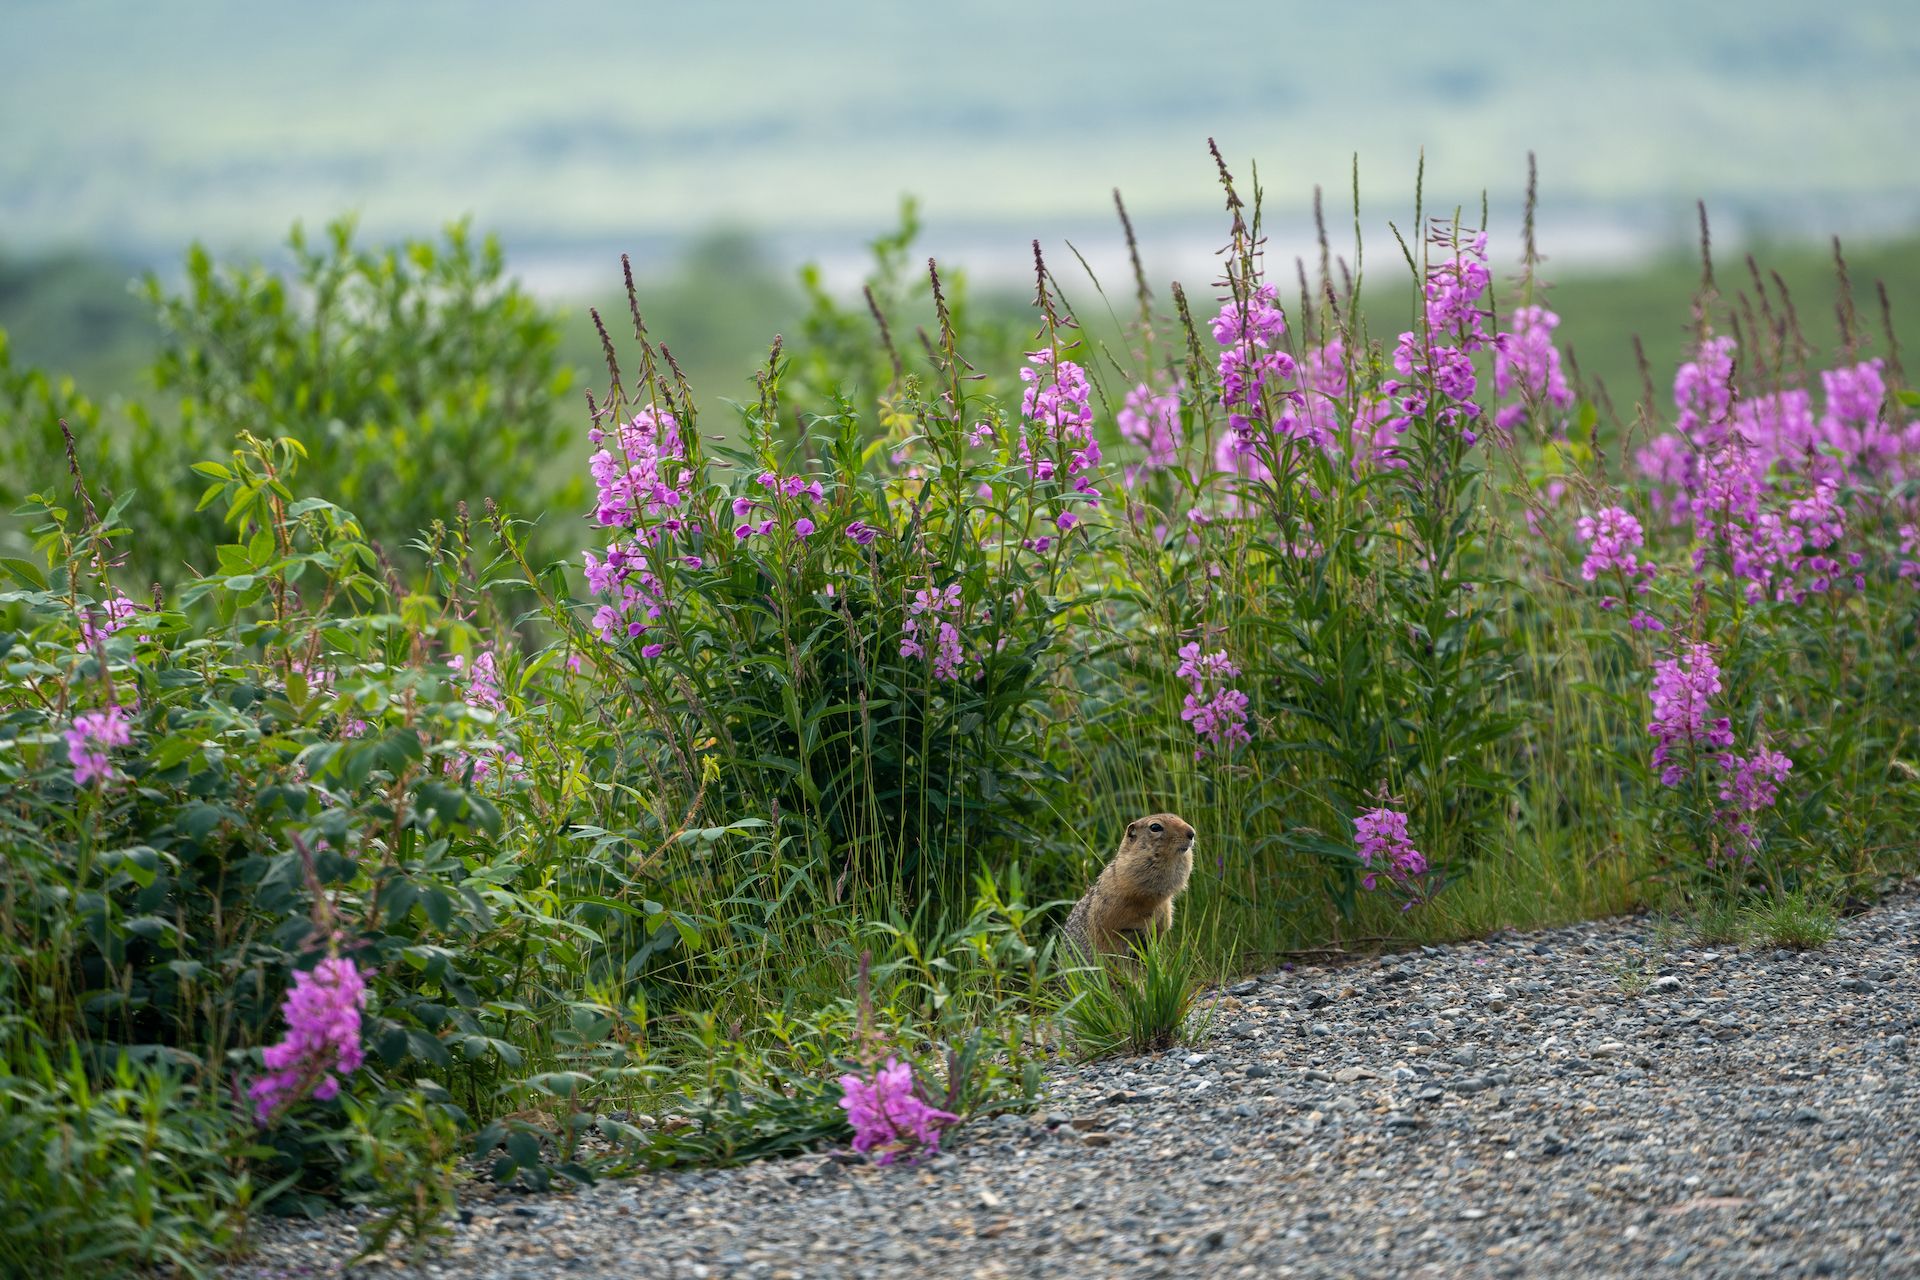 A ground squirrel by the road